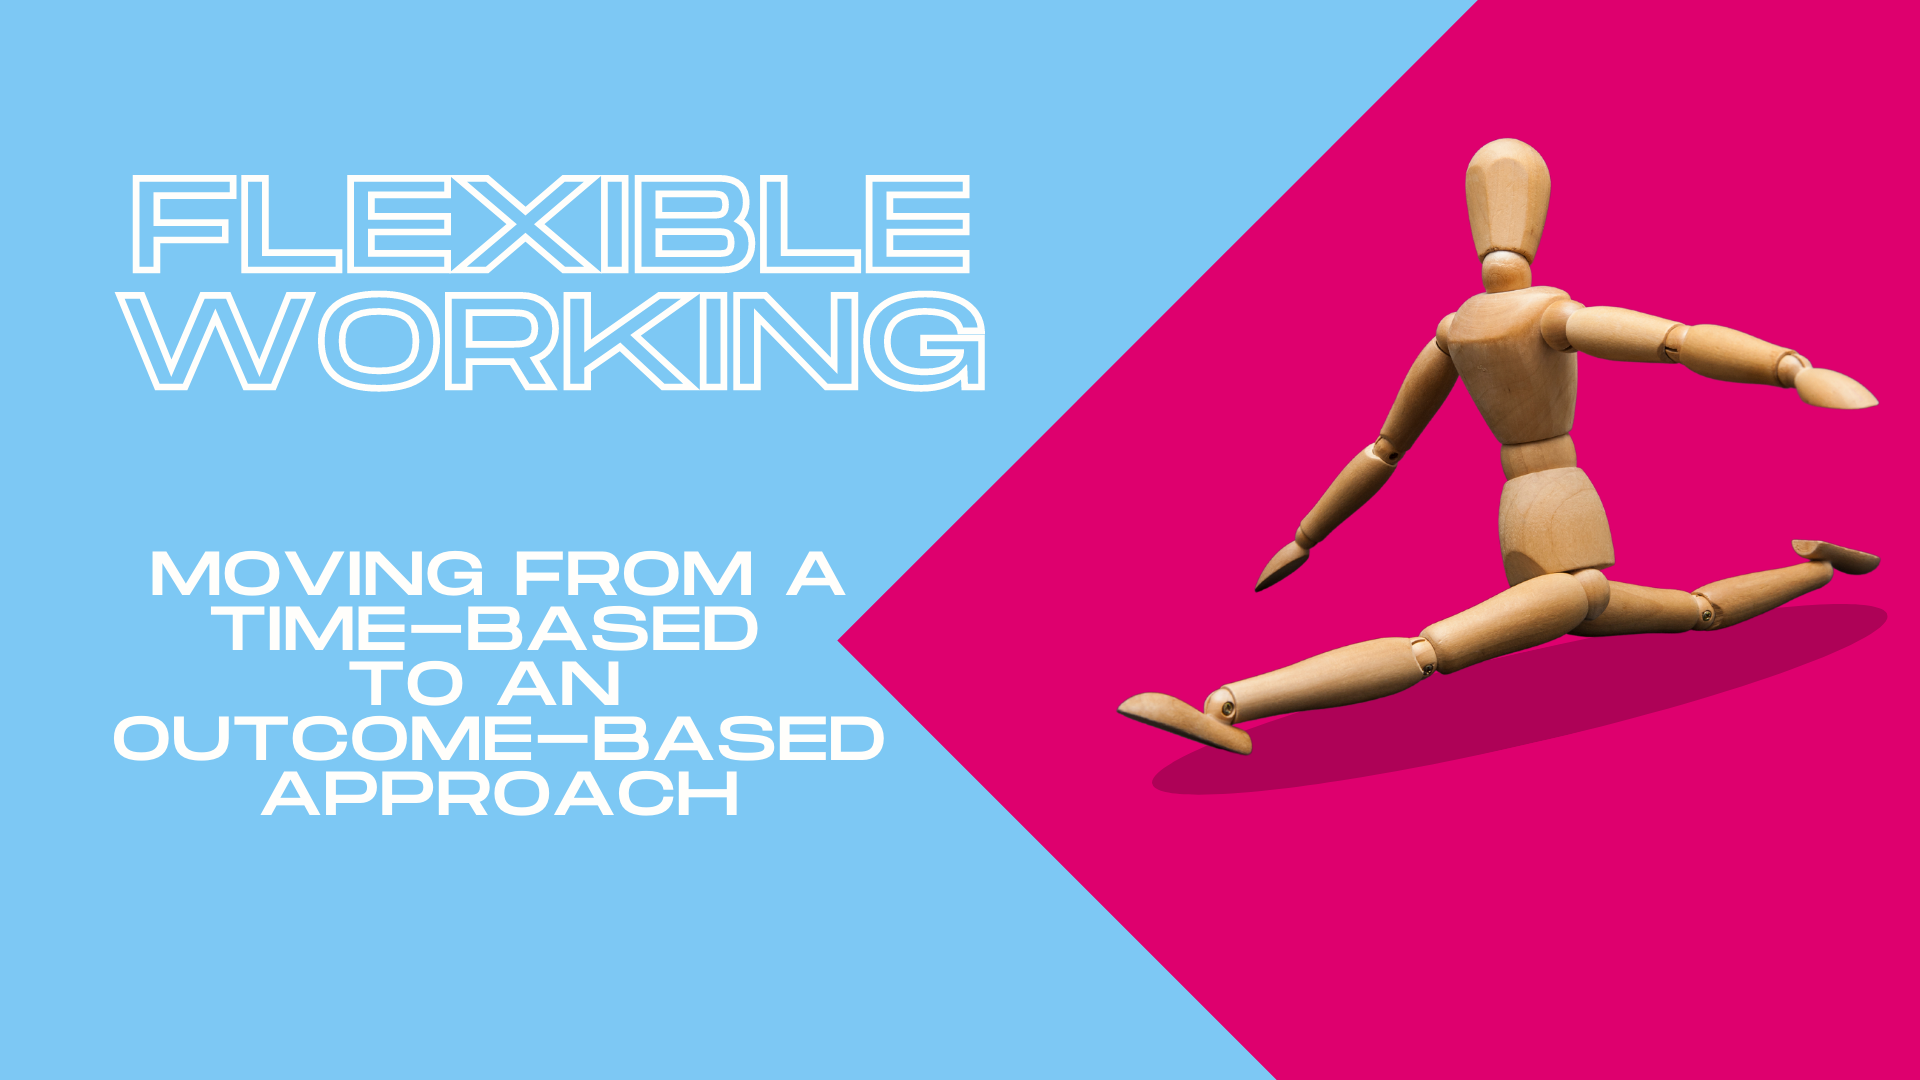 Flexible Working: Moving from a time-based approach to an outcome-based approach